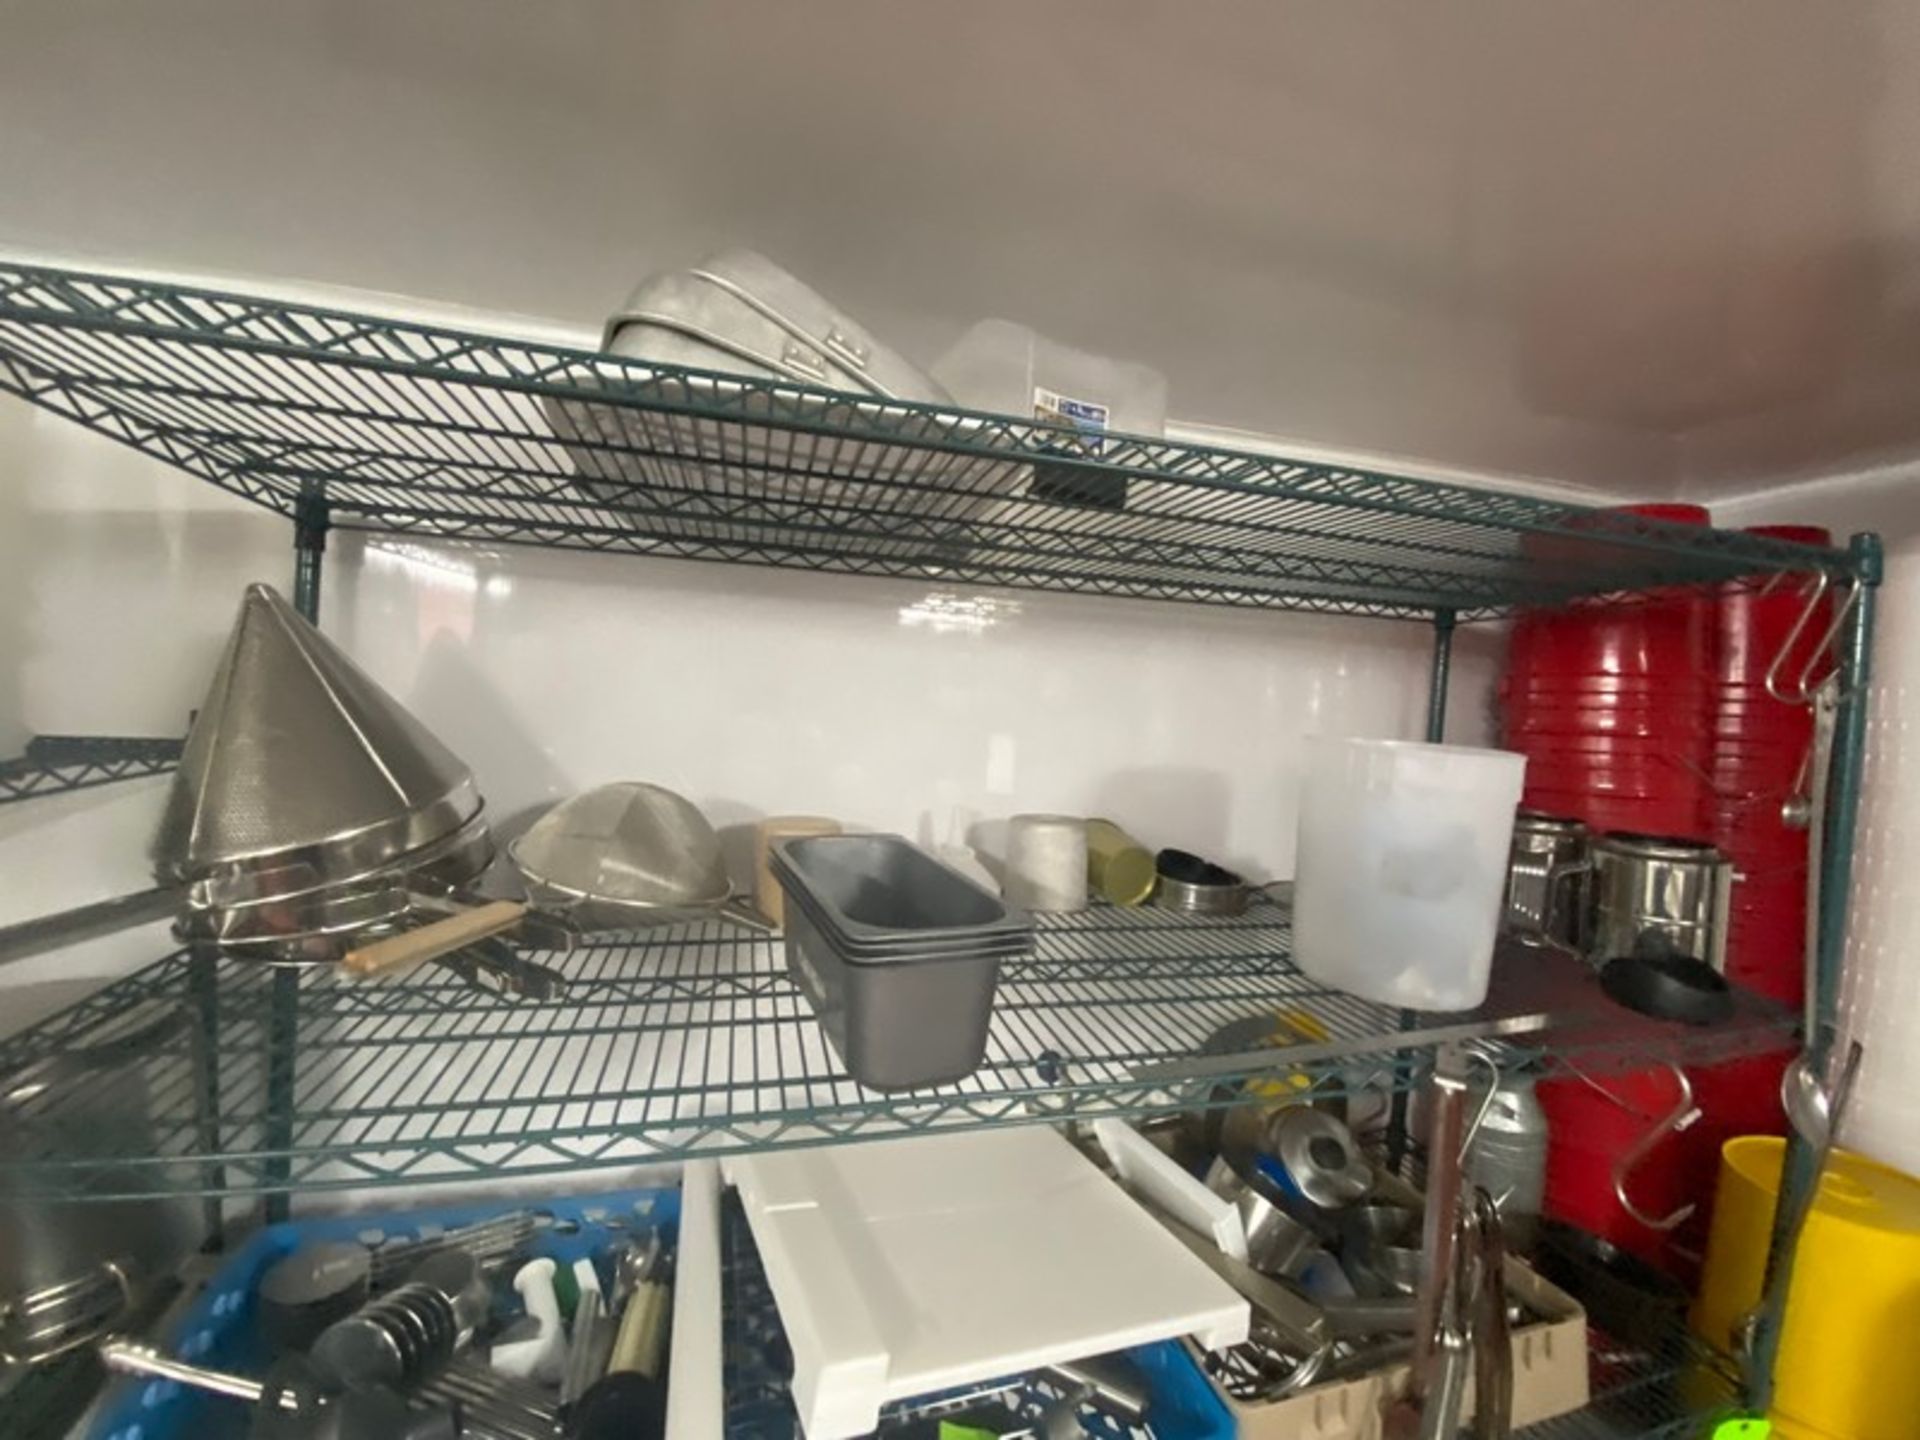 5-Shelf Wire Shelving Unit, with S/S Kitchen Contents, Includes S/S Utelsils, Filteration, Piping, - Image 2 of 5